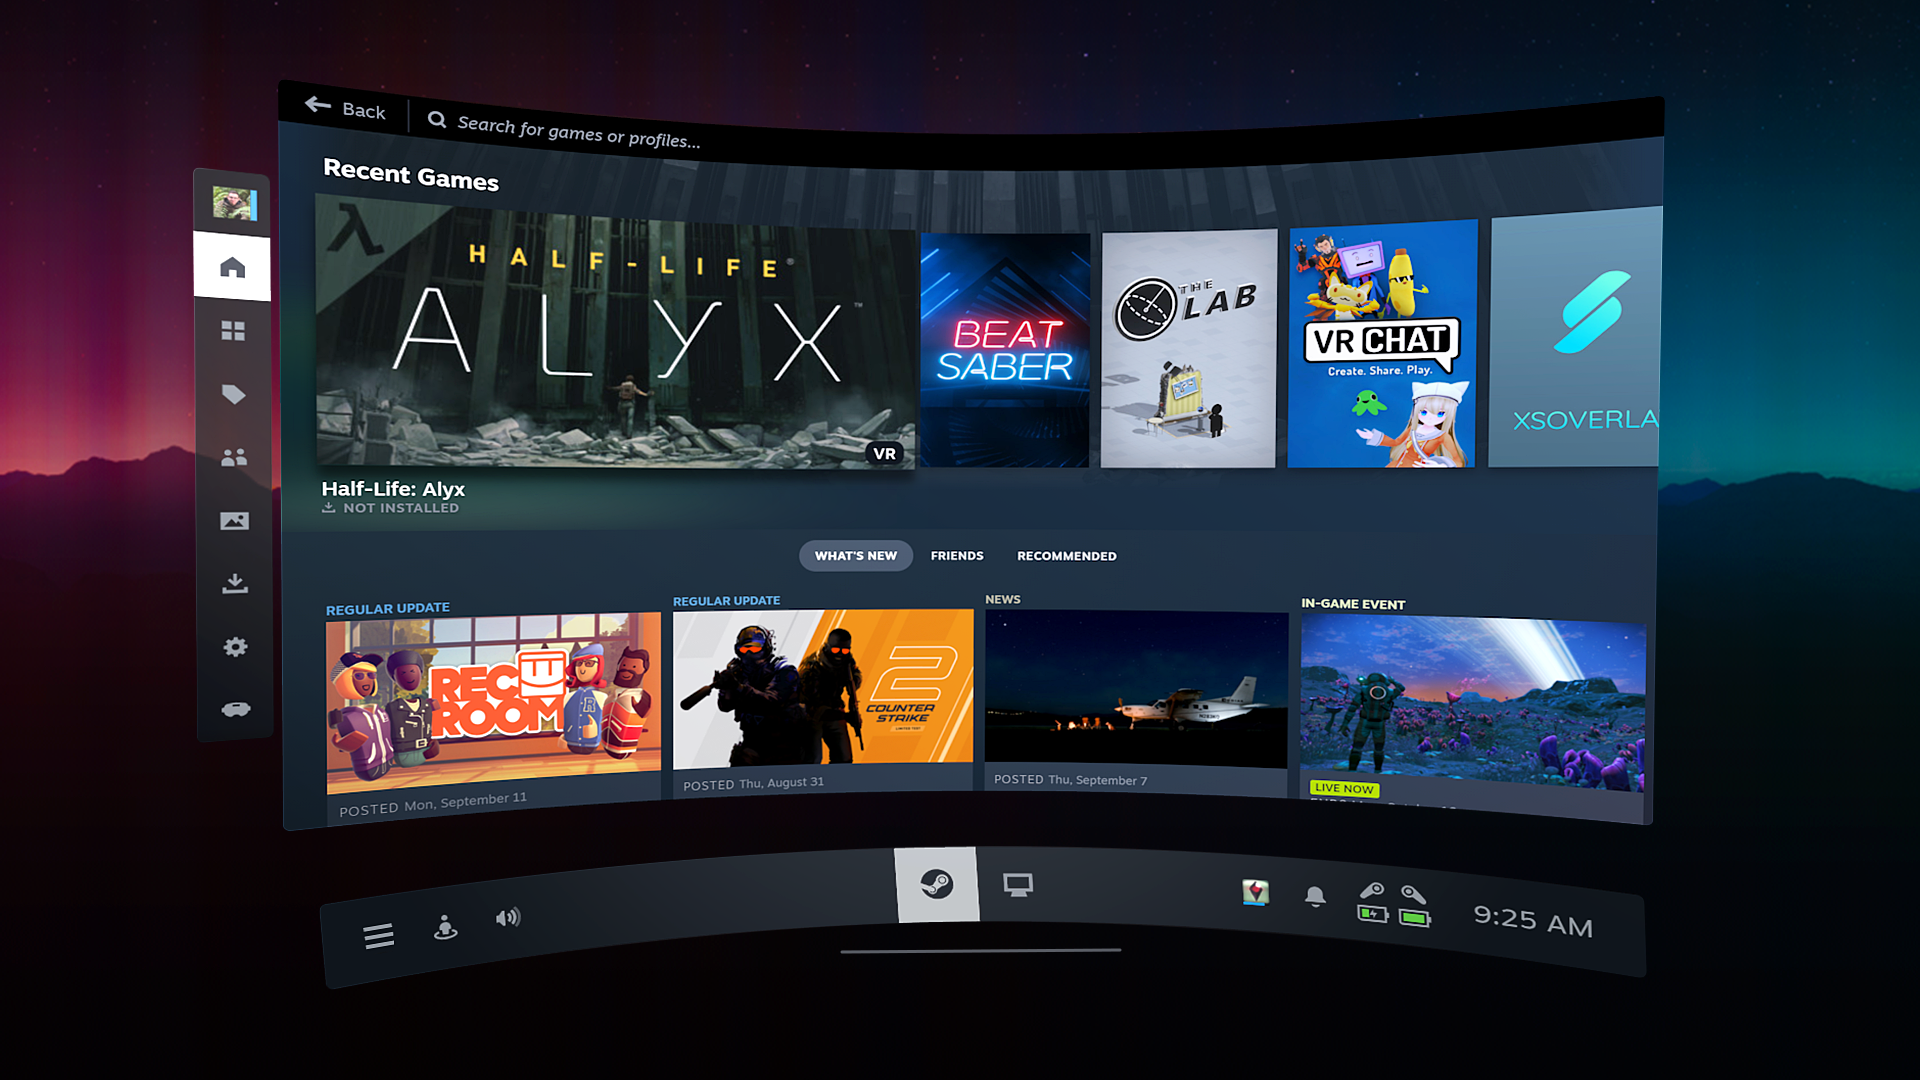 SteamVR 2.0 is now out with an upgraded keyboard and better Steam integration